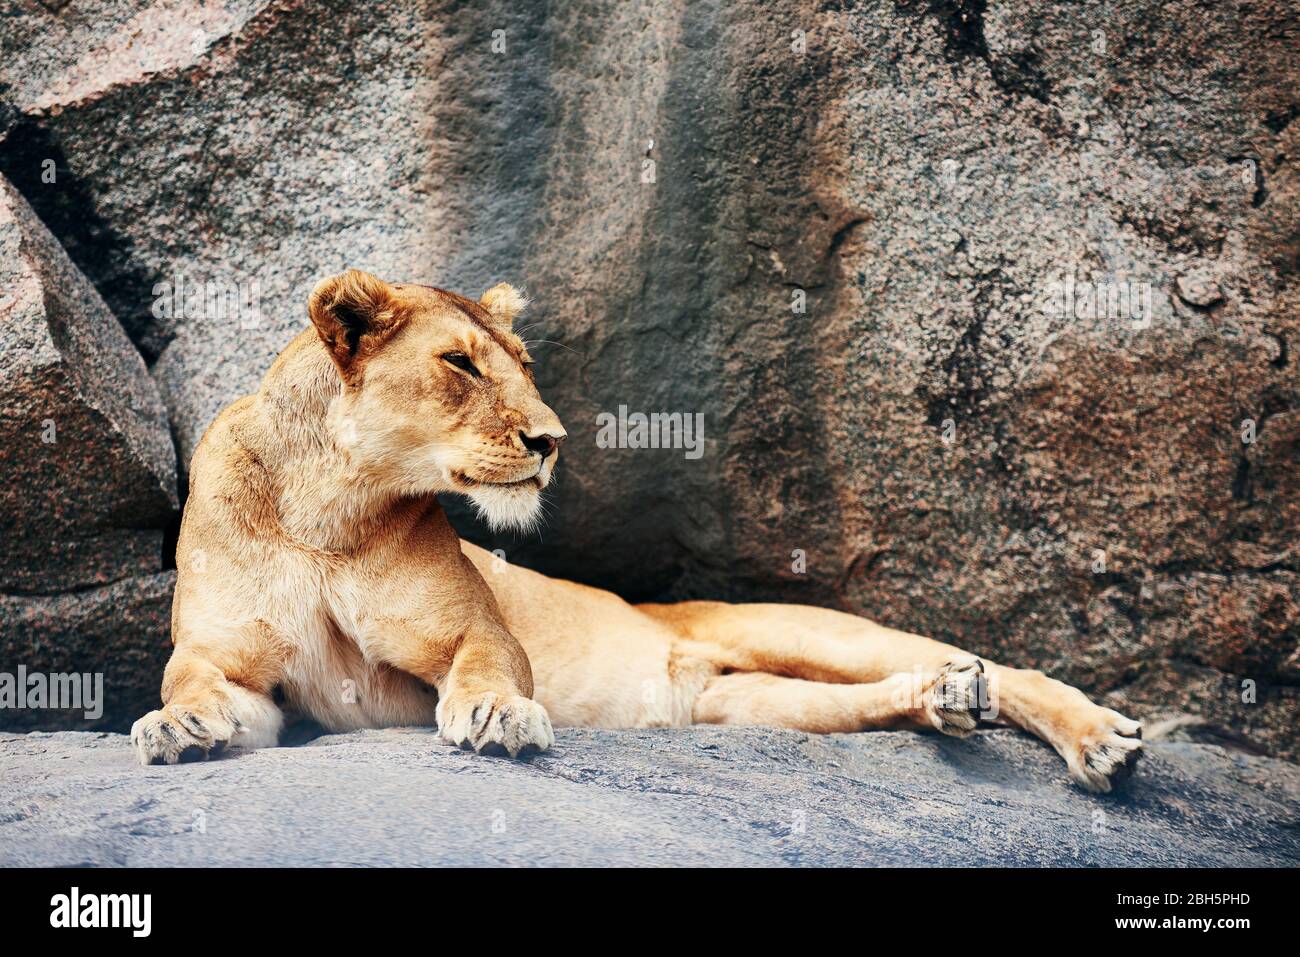 Lioness resting on the rock Stock Photo